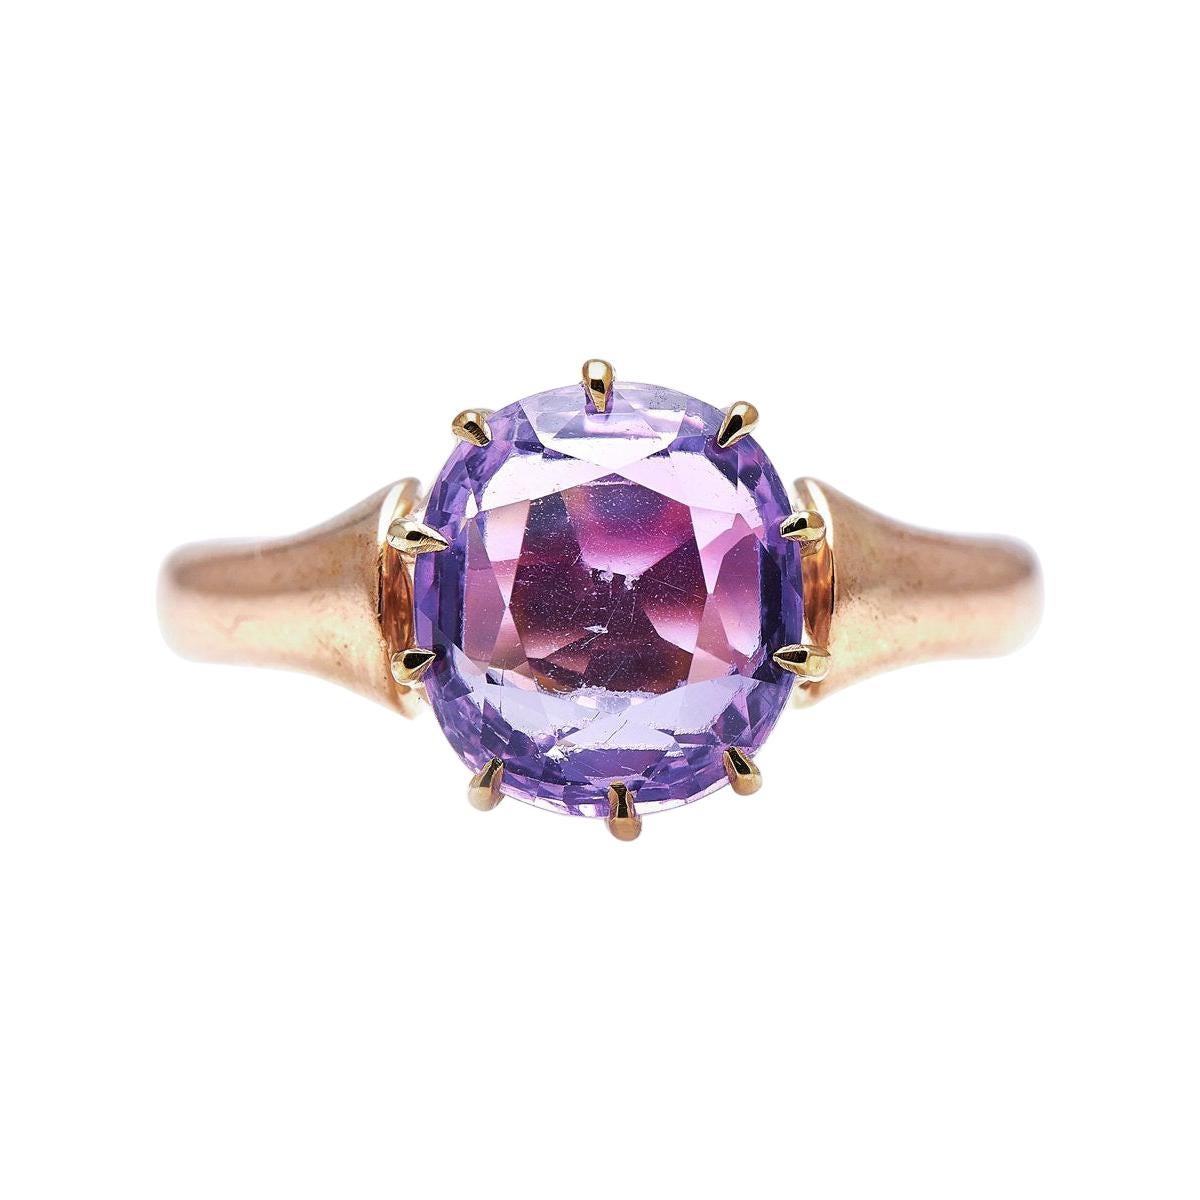 Antique, Victorian, 15ct Gold, Pink Sapphire Ring